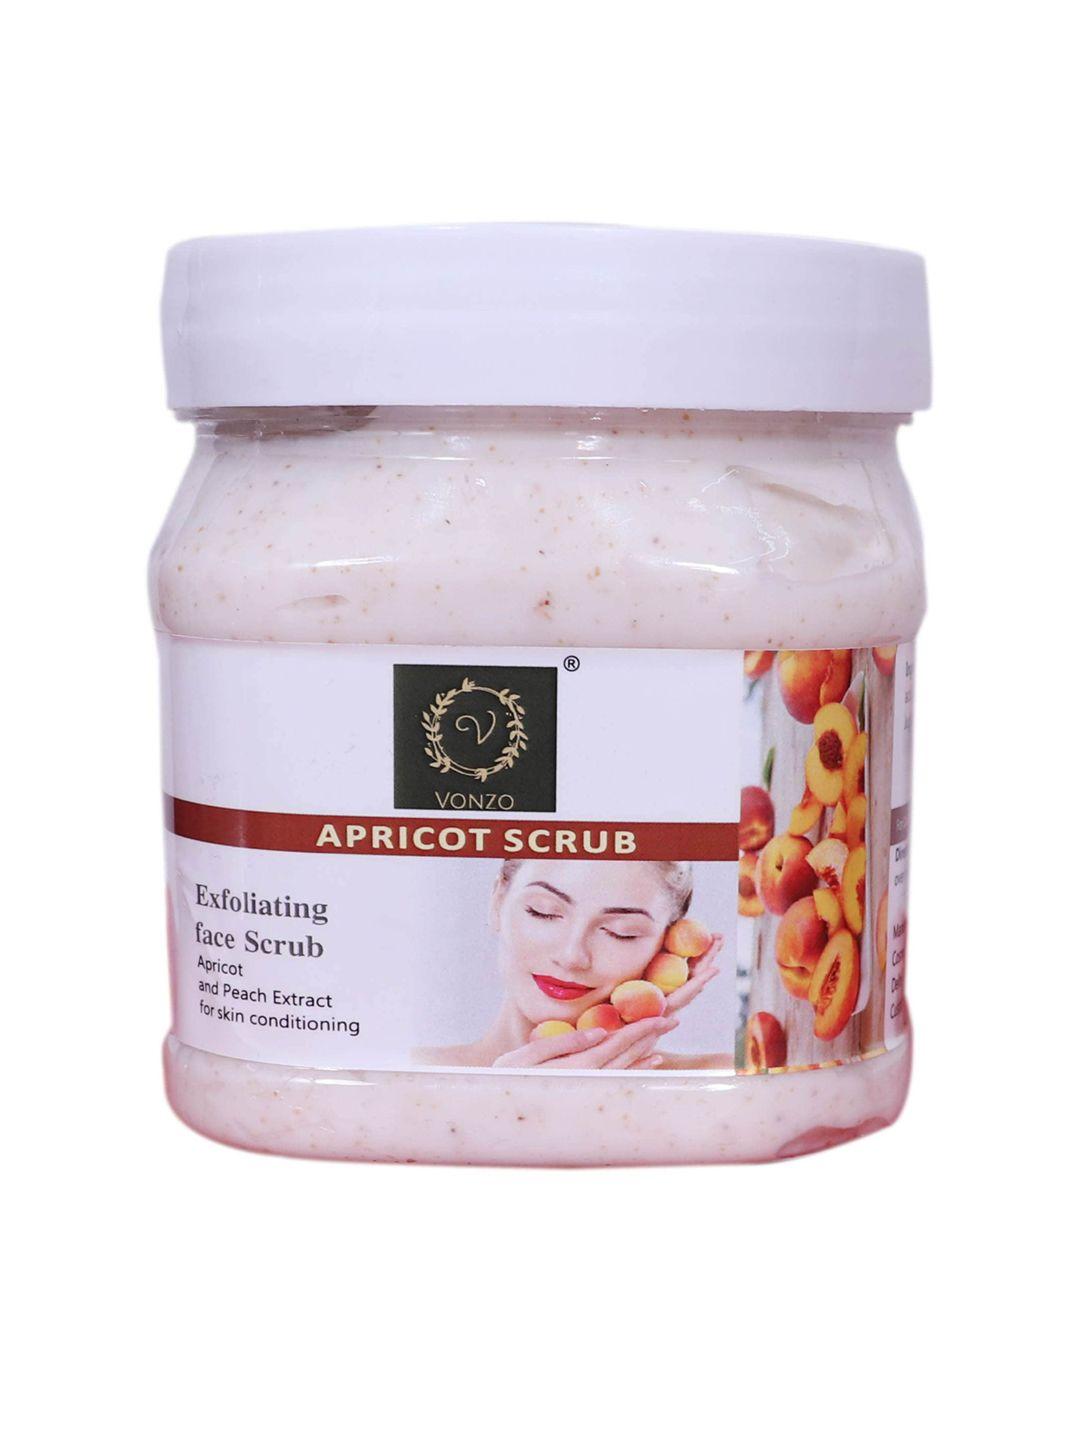 vonzo apricot exfoliating face scrub with peach extract for skin conditioning - 200 ml